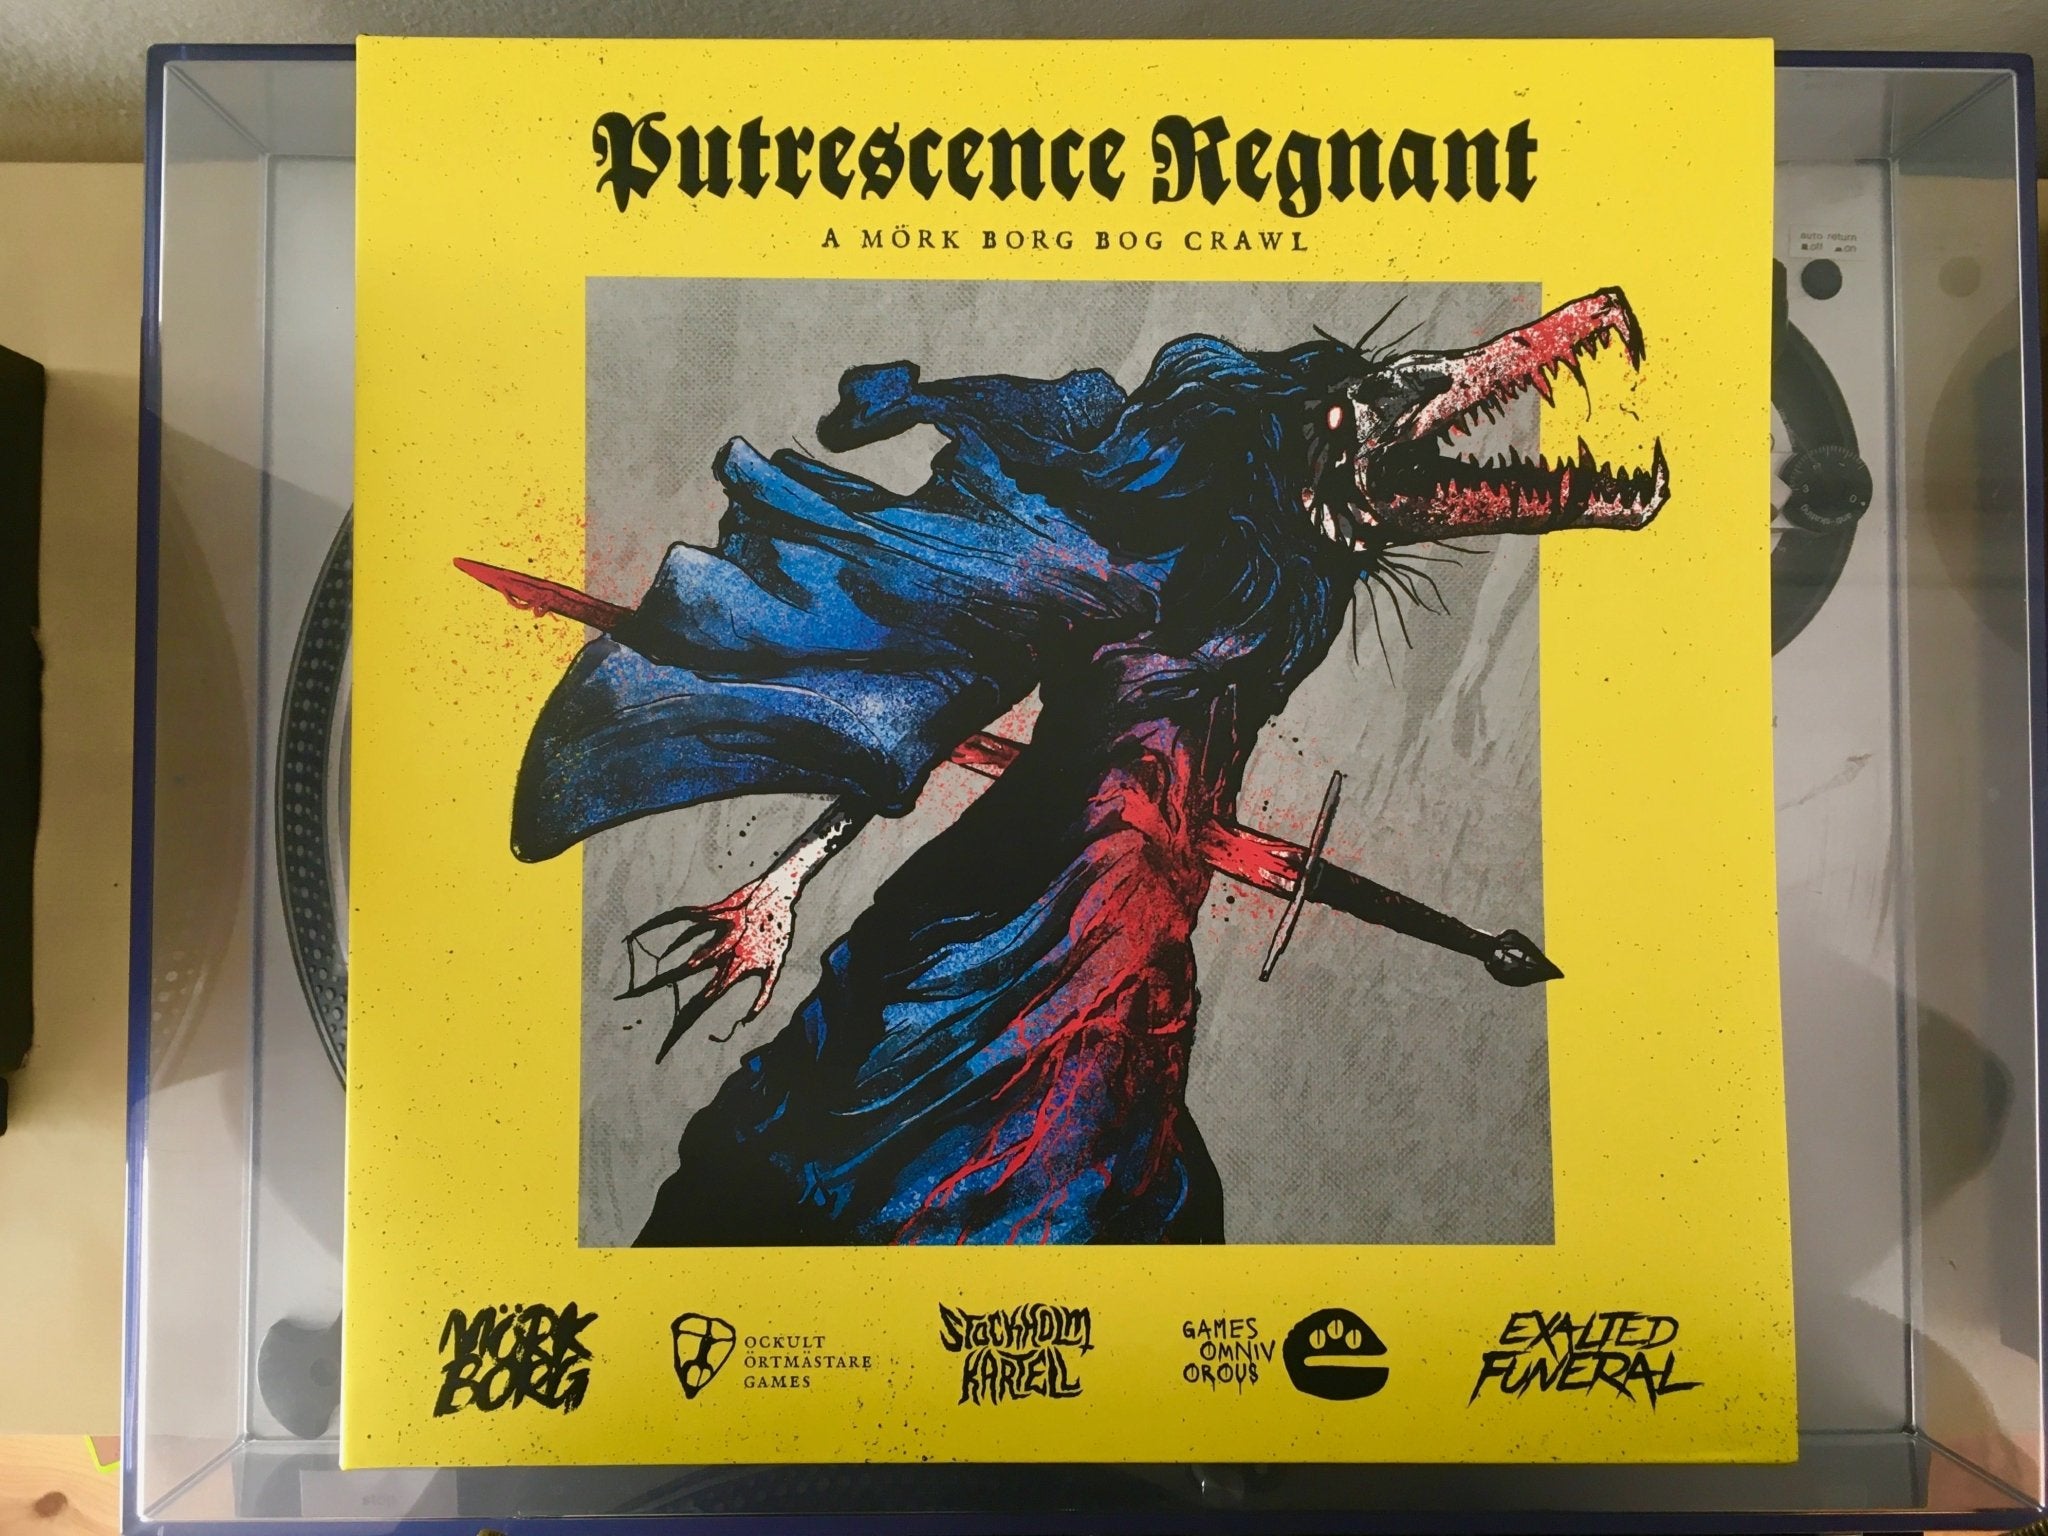 Putrescence Regnant - Exalted Funeral